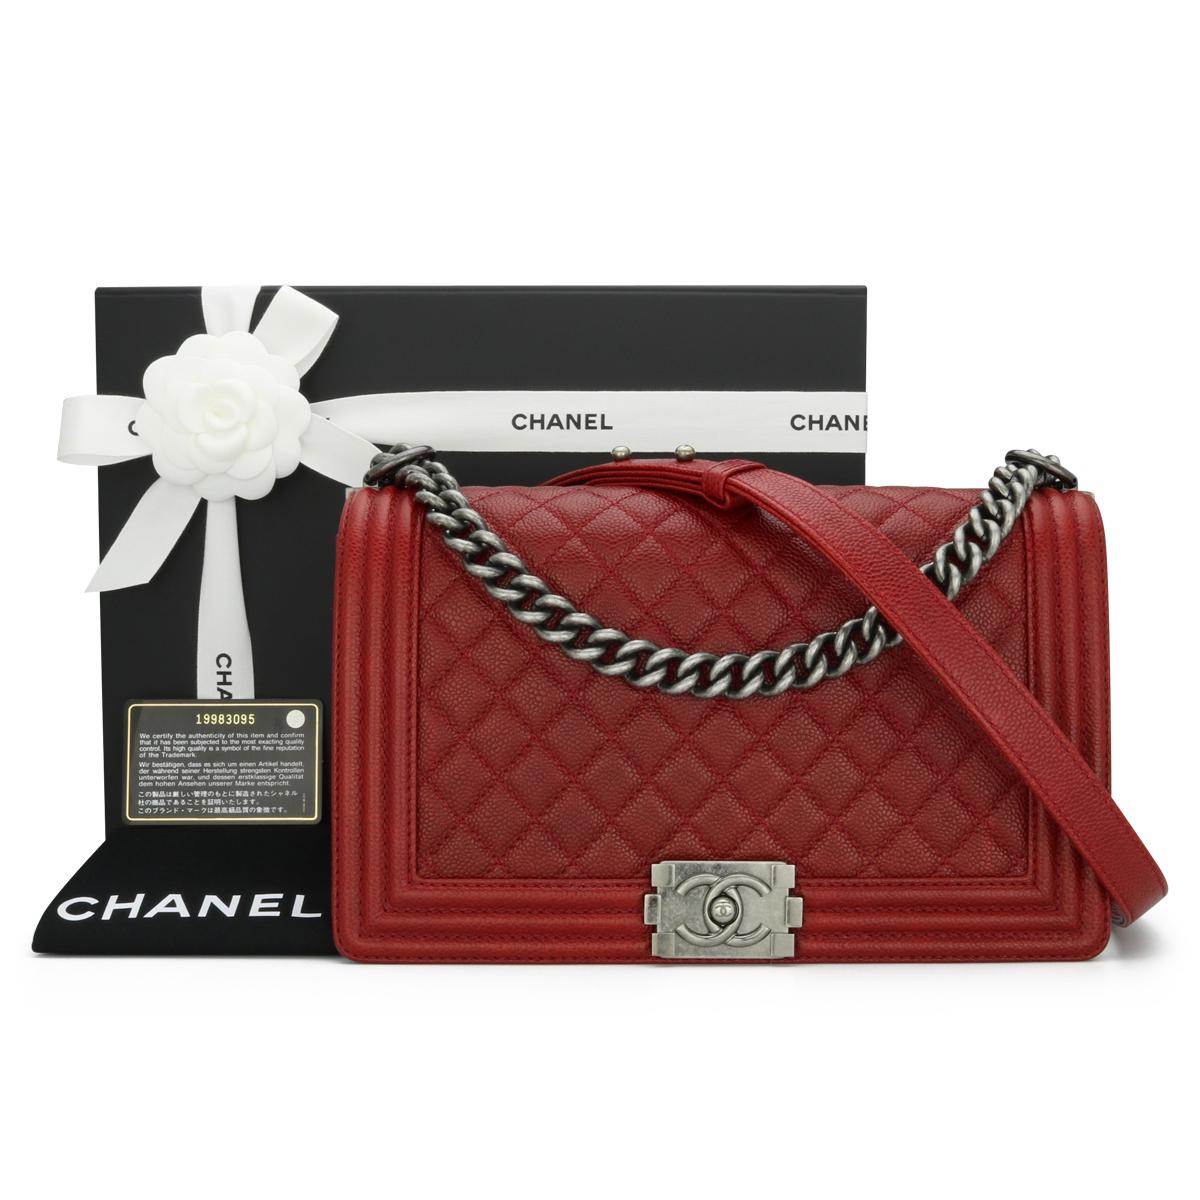 CHANEL New Medium Quilted Boy Bag in Dark Red Caviar with Ruthenium Hardware 2014 – 14B.

This stunning bag is still in very good condition. It still holds its original shape, and the hardware is still very clean and shiny.

- Exterior Condition: